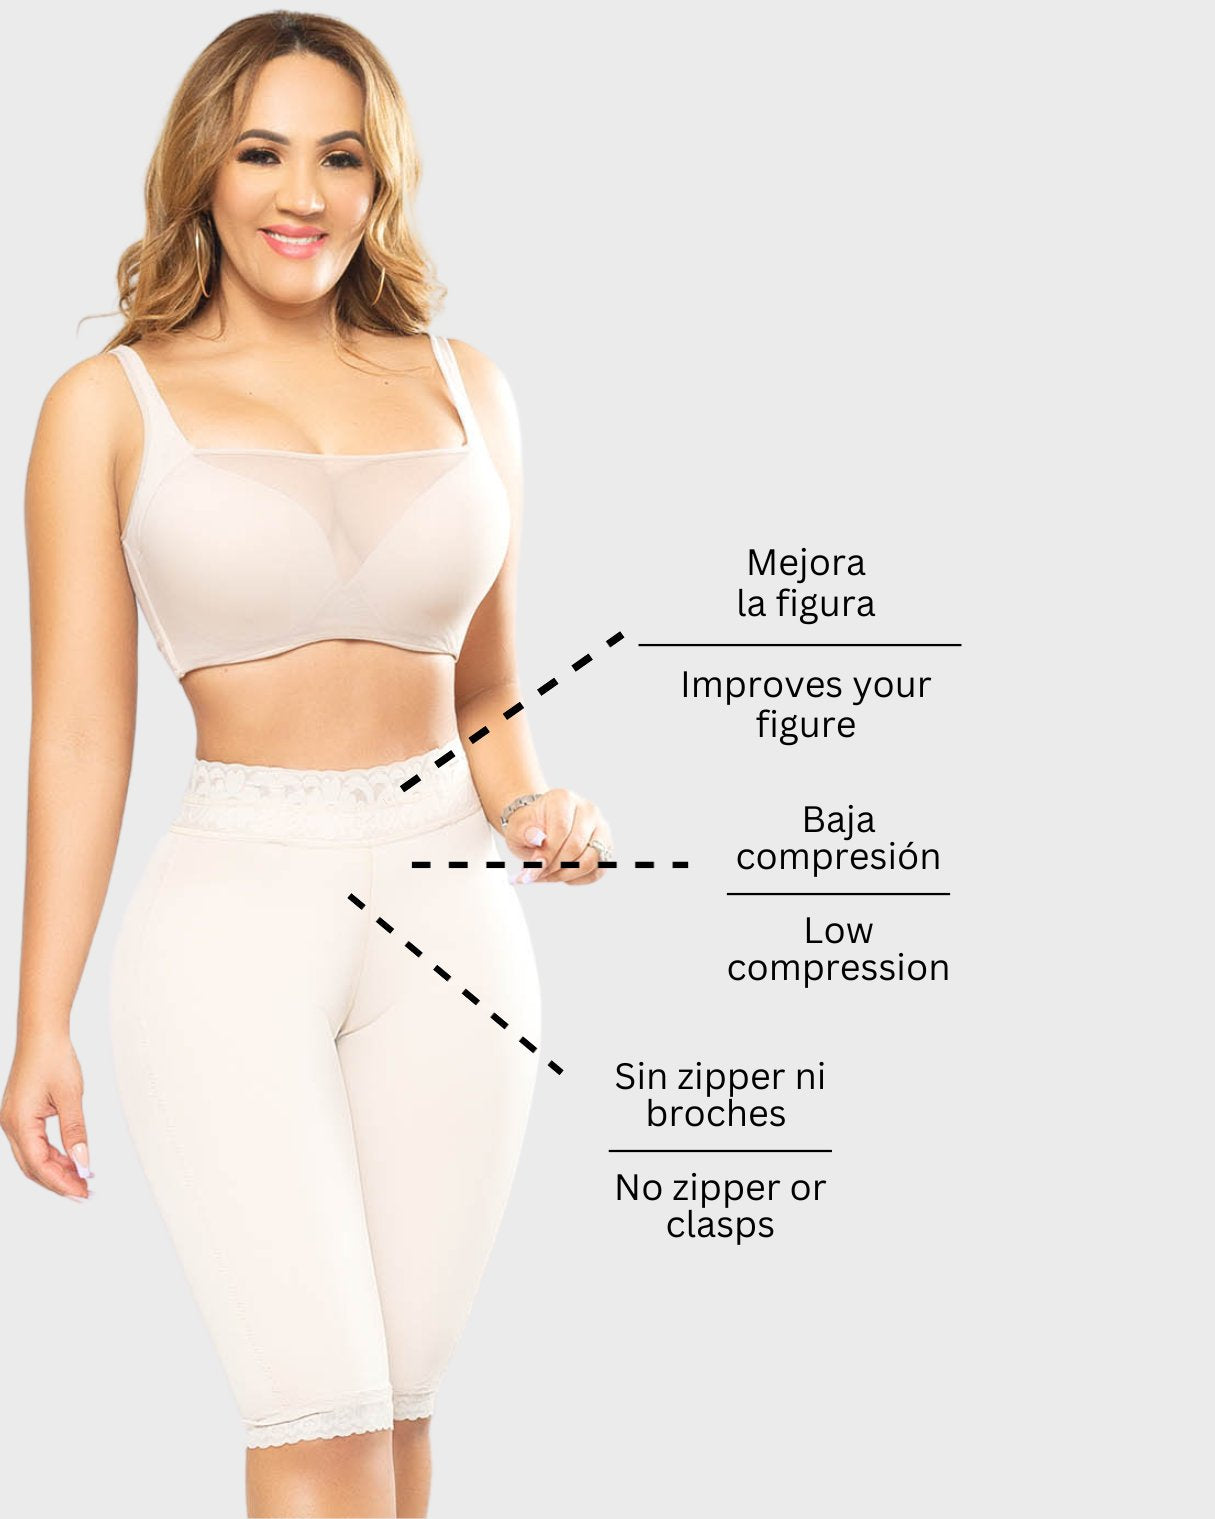 V Neck Body Shaper with Spaghetti Straps: ProLyf Styles Exclusive